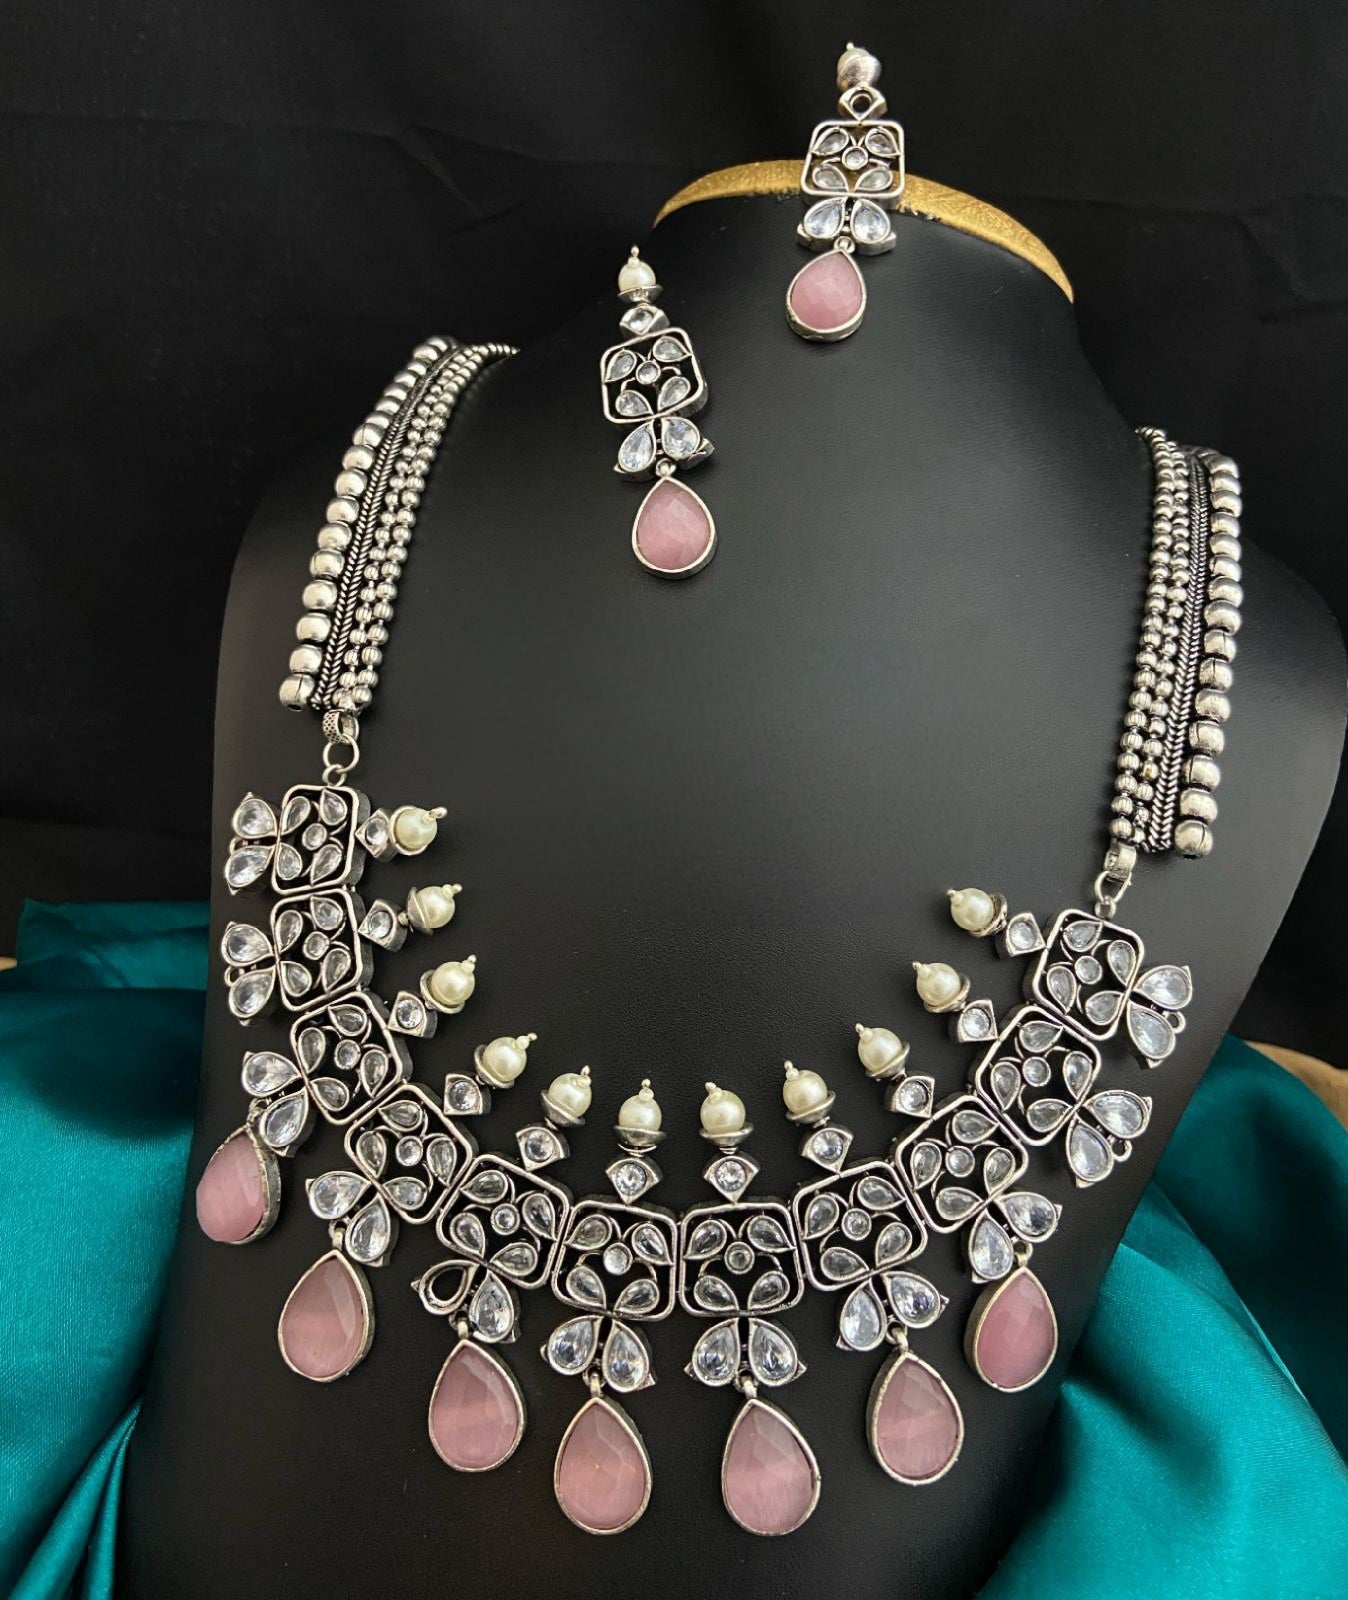 Premium Quality German Silver Long Necklace set | Indian Wedding Jewelry | Indian Bollywood Style Fashion Wedding Silver Plated Necklace Earrings Party Jewelry Set